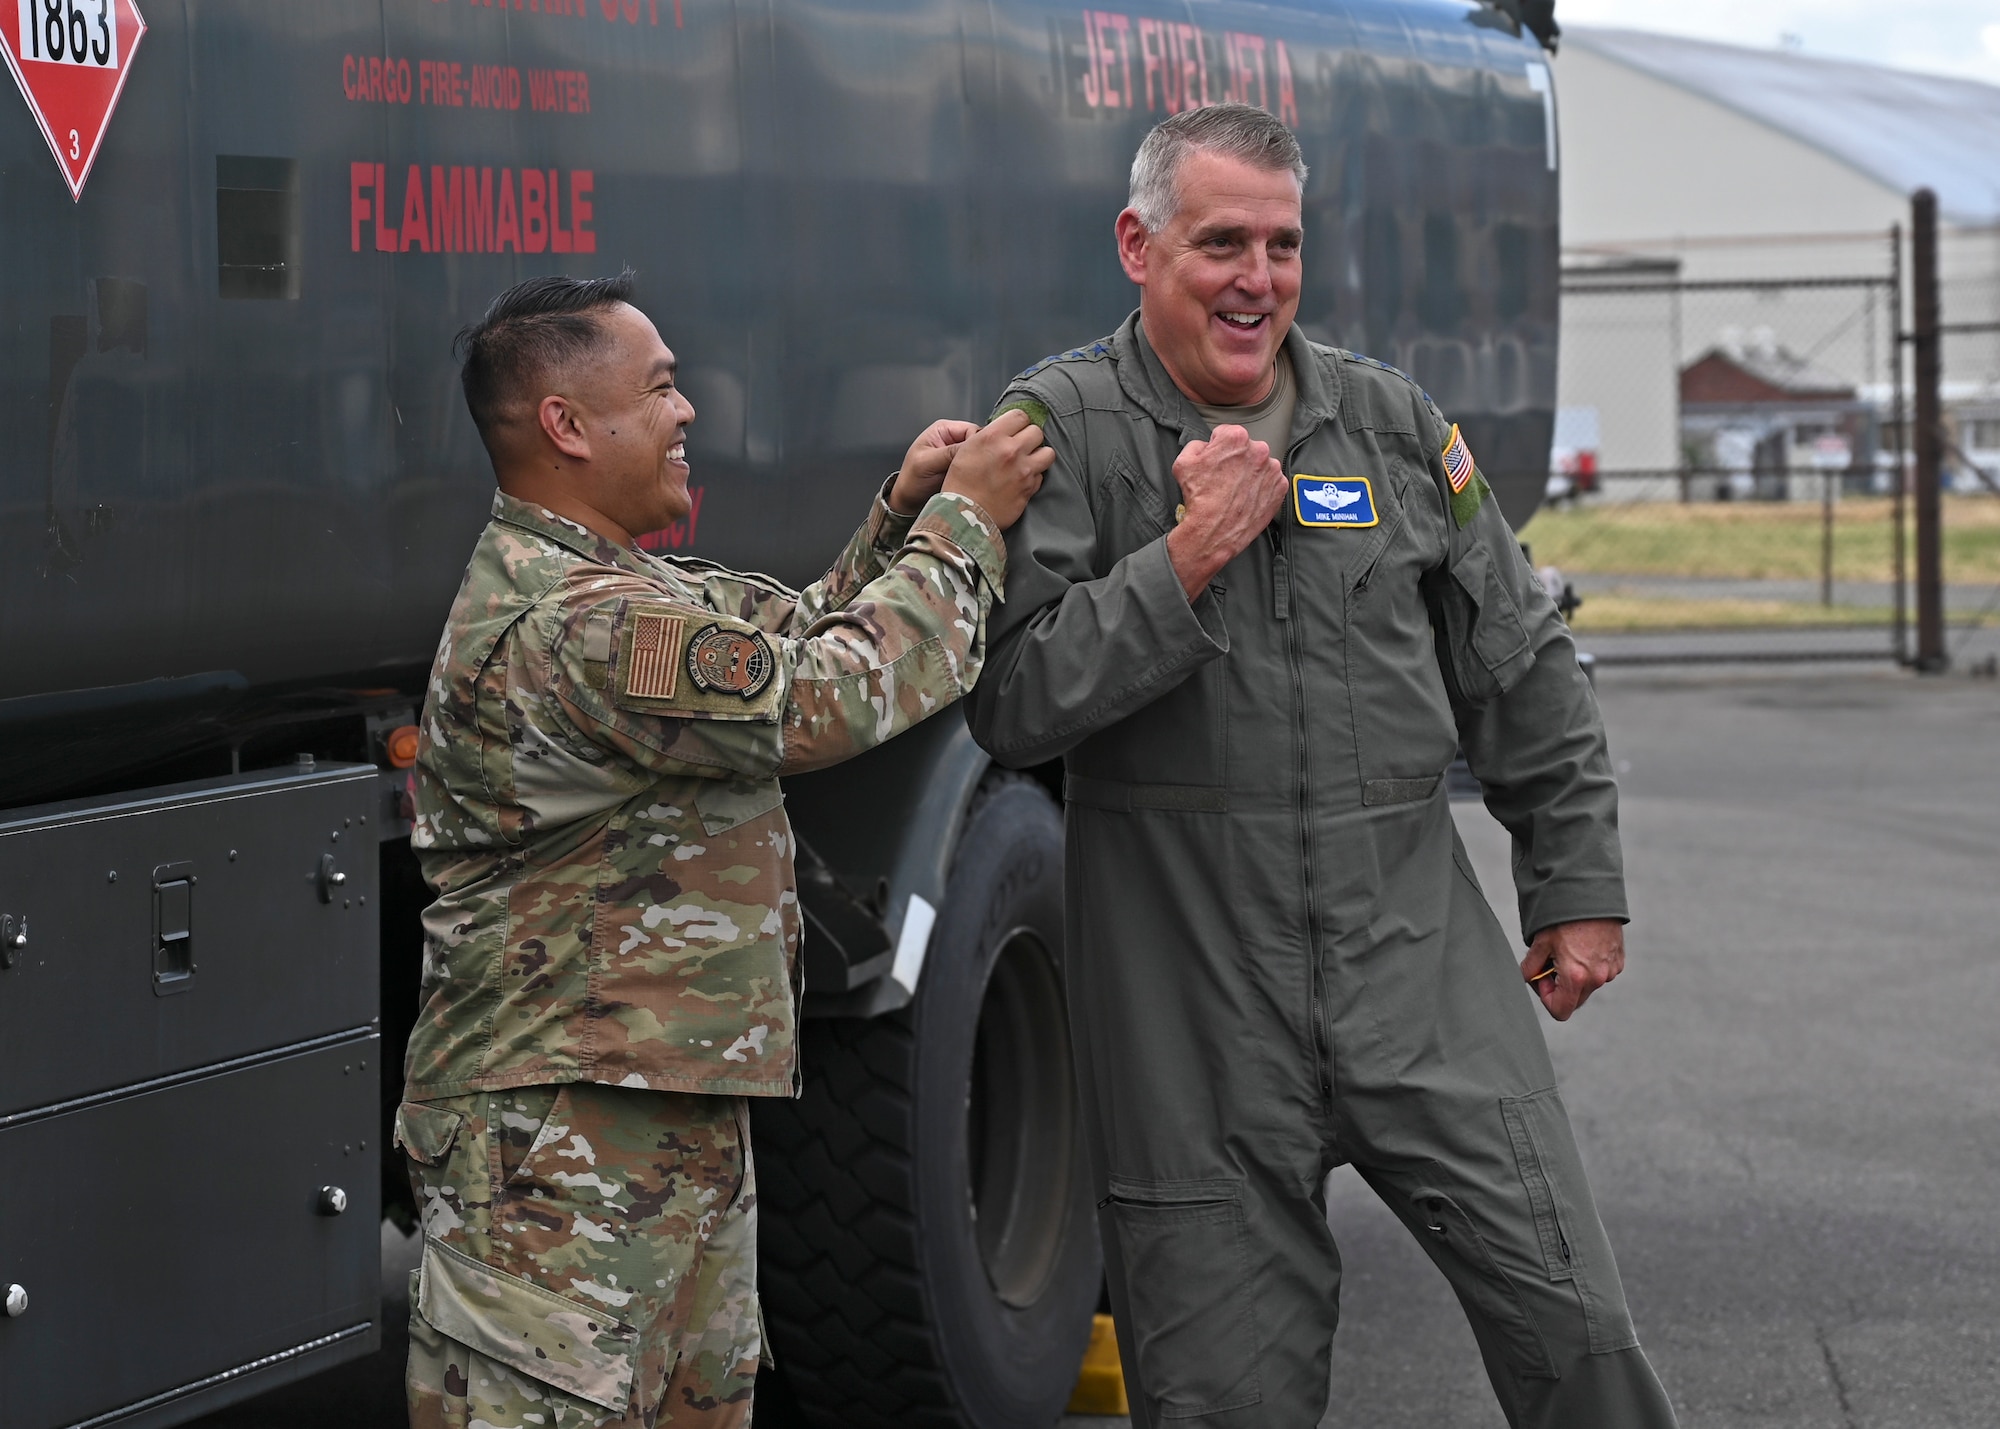 U.S. Air Force Tech. Sgt. Jeffrey Panen, left, fuels service center NCO in charge with the 627th Logistics Readiness Squadron, places a patch on Gen. Mike Minihan, Air Mobility Command commander, during his visit to Joint Base Lewis-McChord, Washington, July 7, 2022. Minihan and Chief Master Sgt. Brian Kruzelnick, AMC command chief, spent two days visiting Team McChord to experience the way America’s Airlift Wing executes rapid global mobility. (U.S. Air Force photo by Senior Airman Callie Norton)